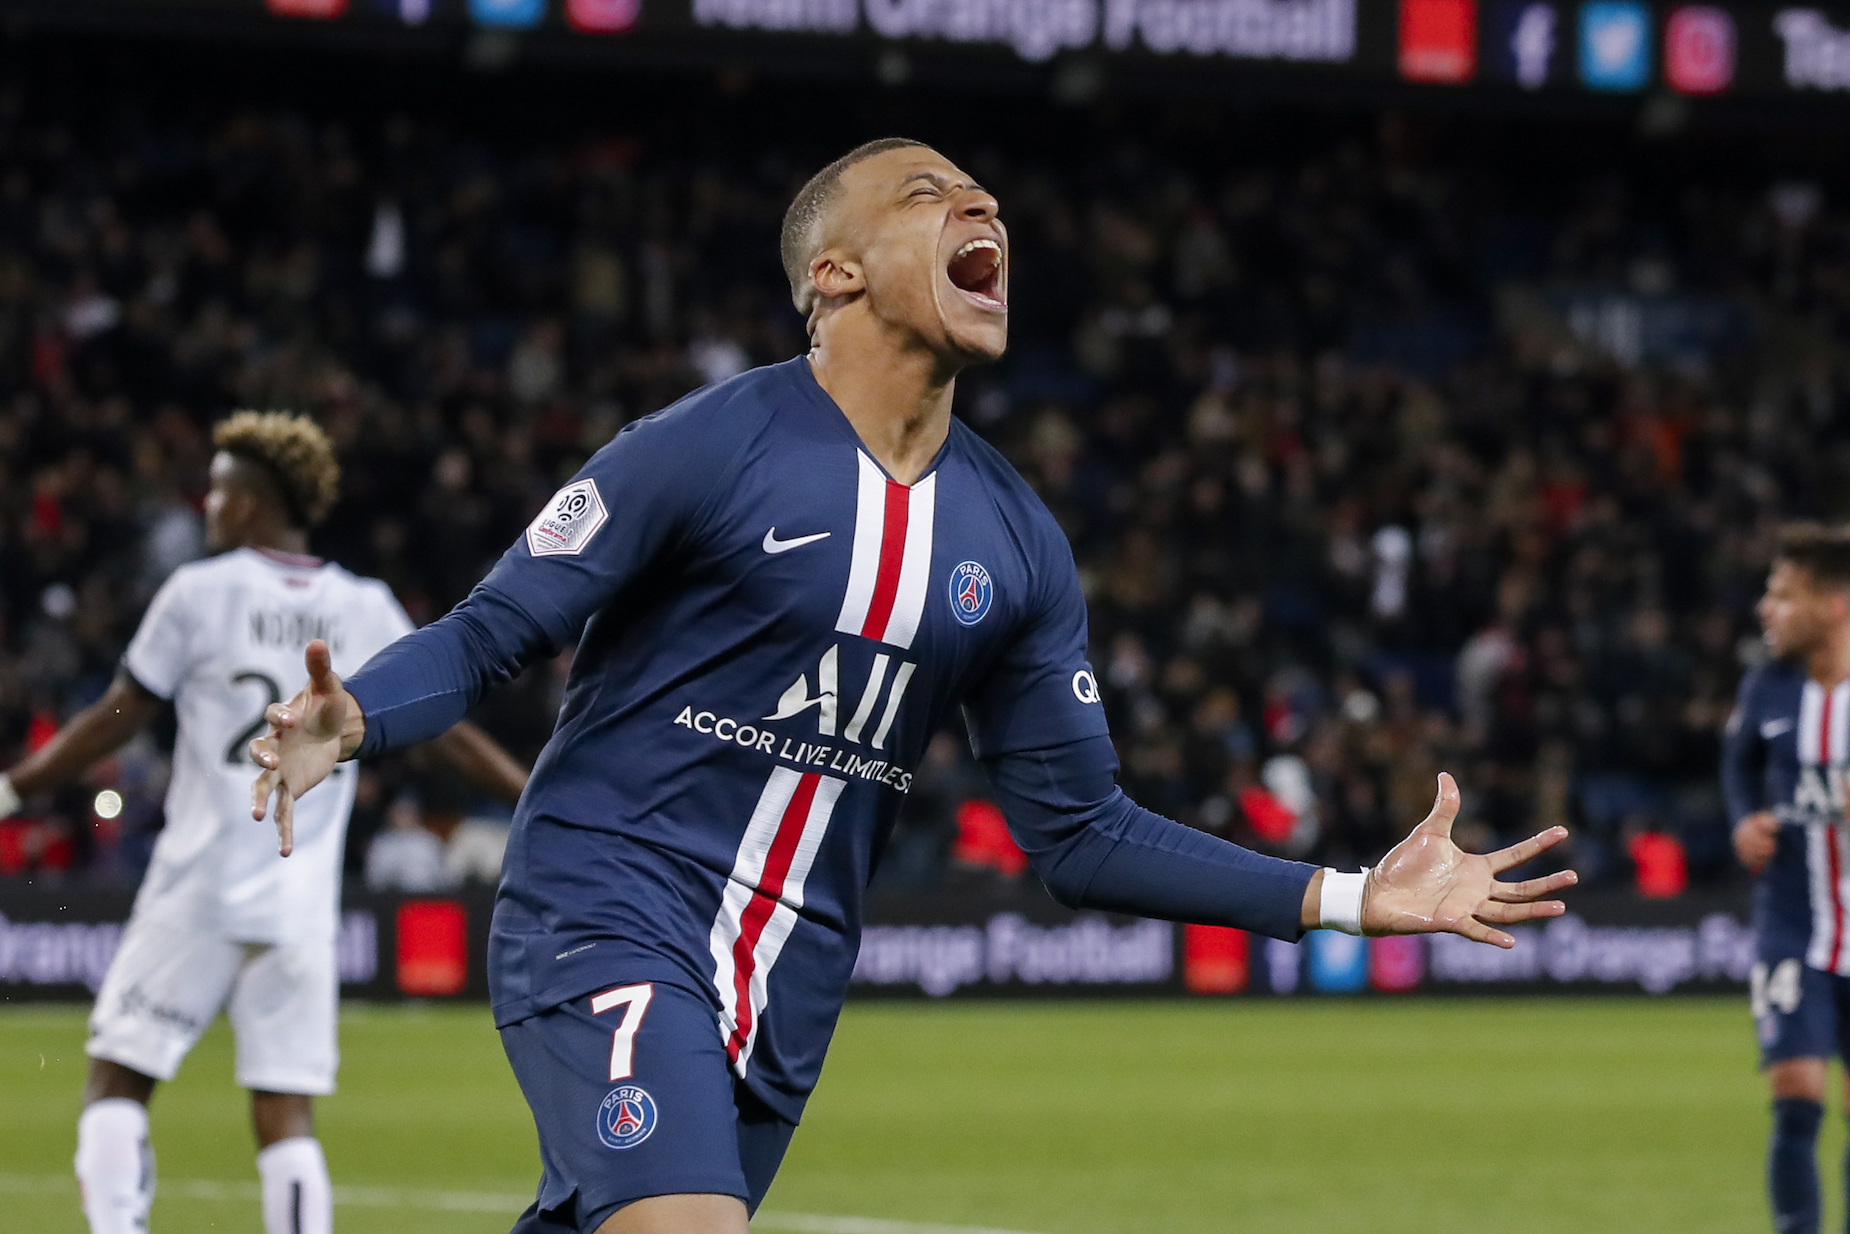 PSG star Kylian Mbappe is young, but he's also incredibly wealthy.